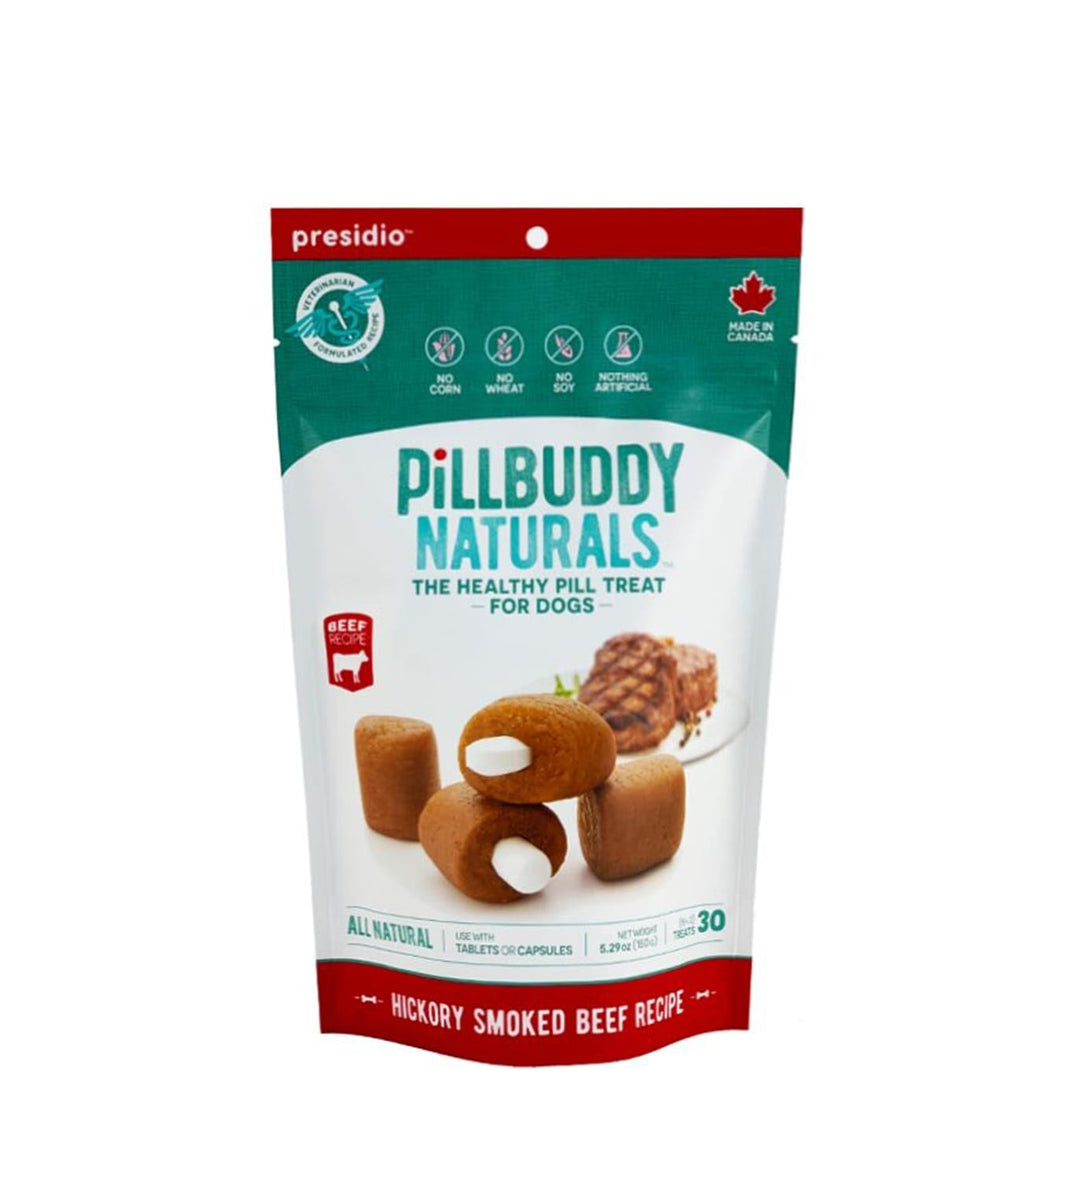 PillBuddy Naturals Beef Recipe for Dogs